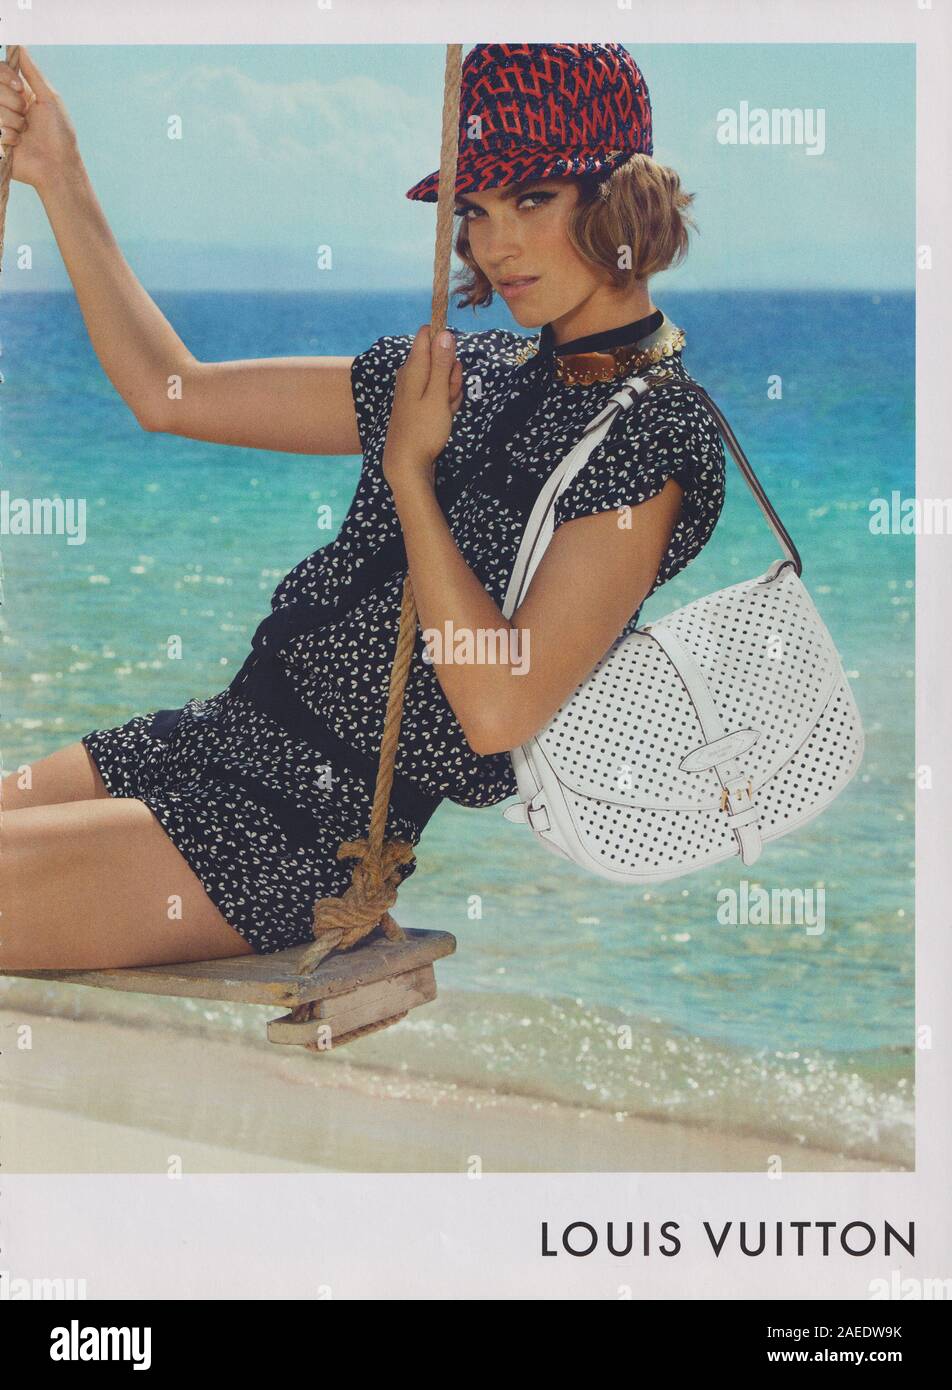 poster advertising Louis Vuitton handbag in paper magazine from 2012 year,  advertisement, creative LV Louis Vuitton advert from 2010s Stock Photo -  Alamy